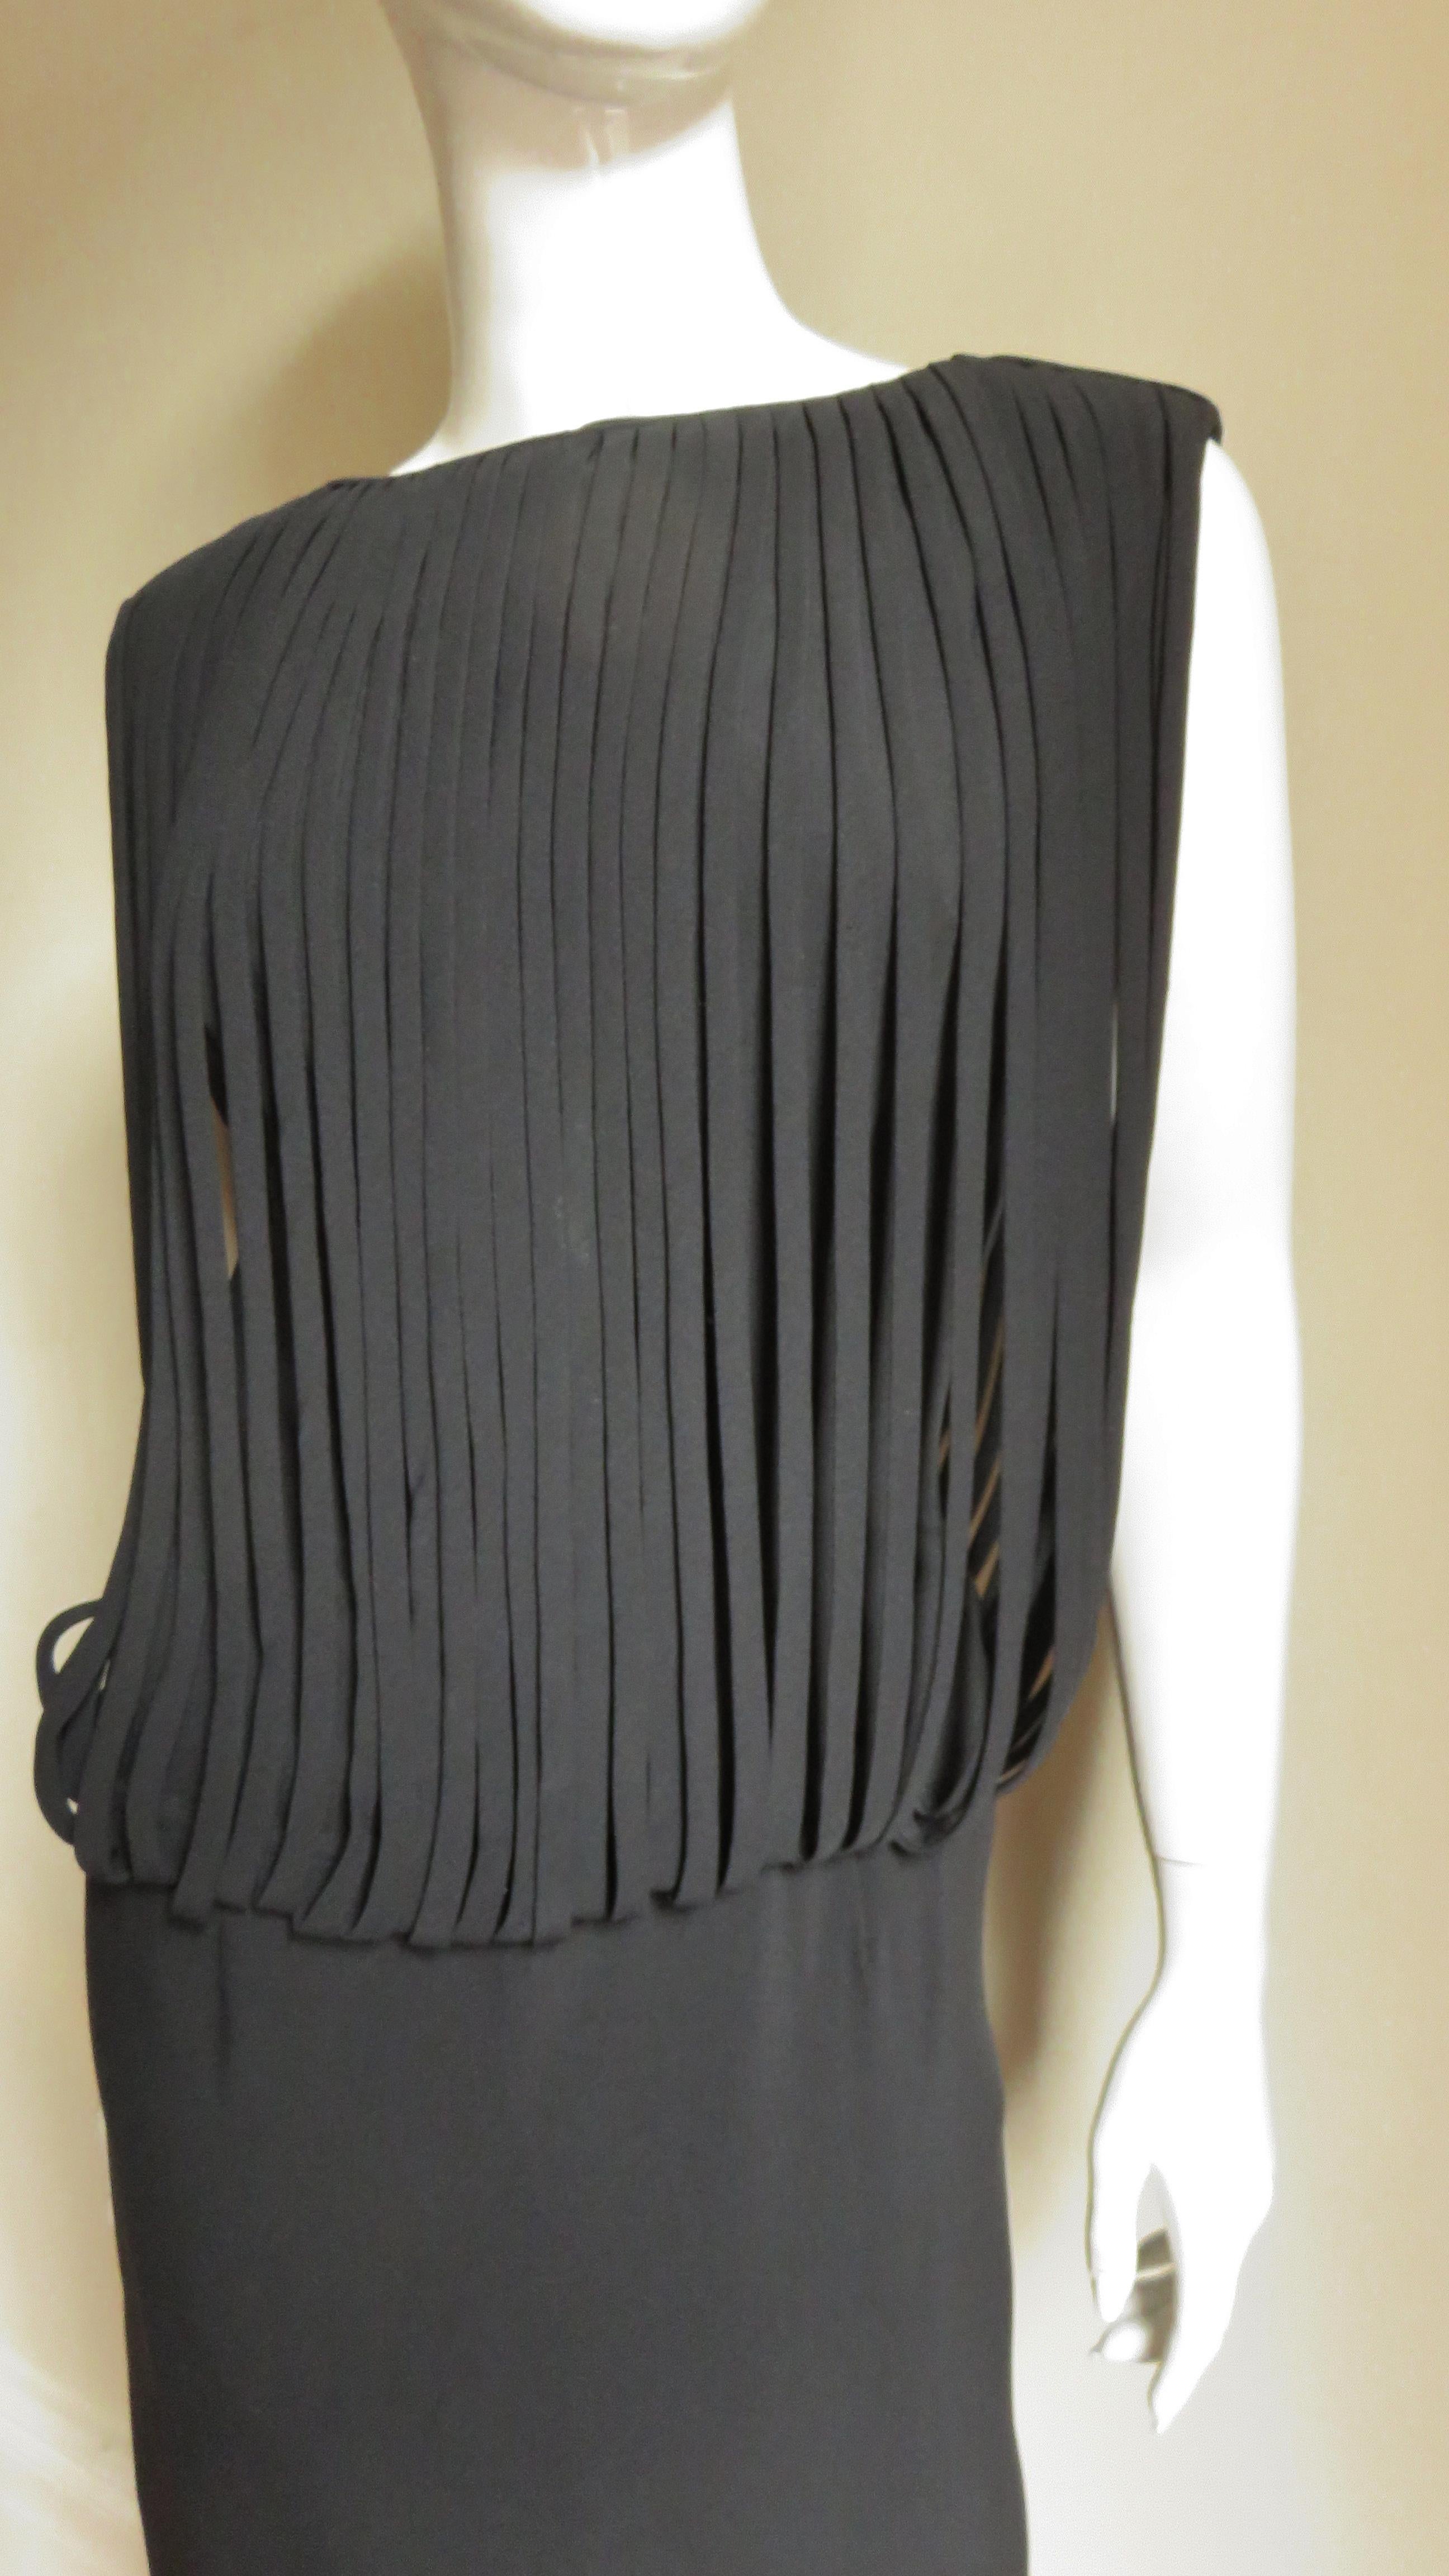 Oleg Cassini 1950s Cage Bodice Dress  In Good Condition For Sale In Water Mill, NY